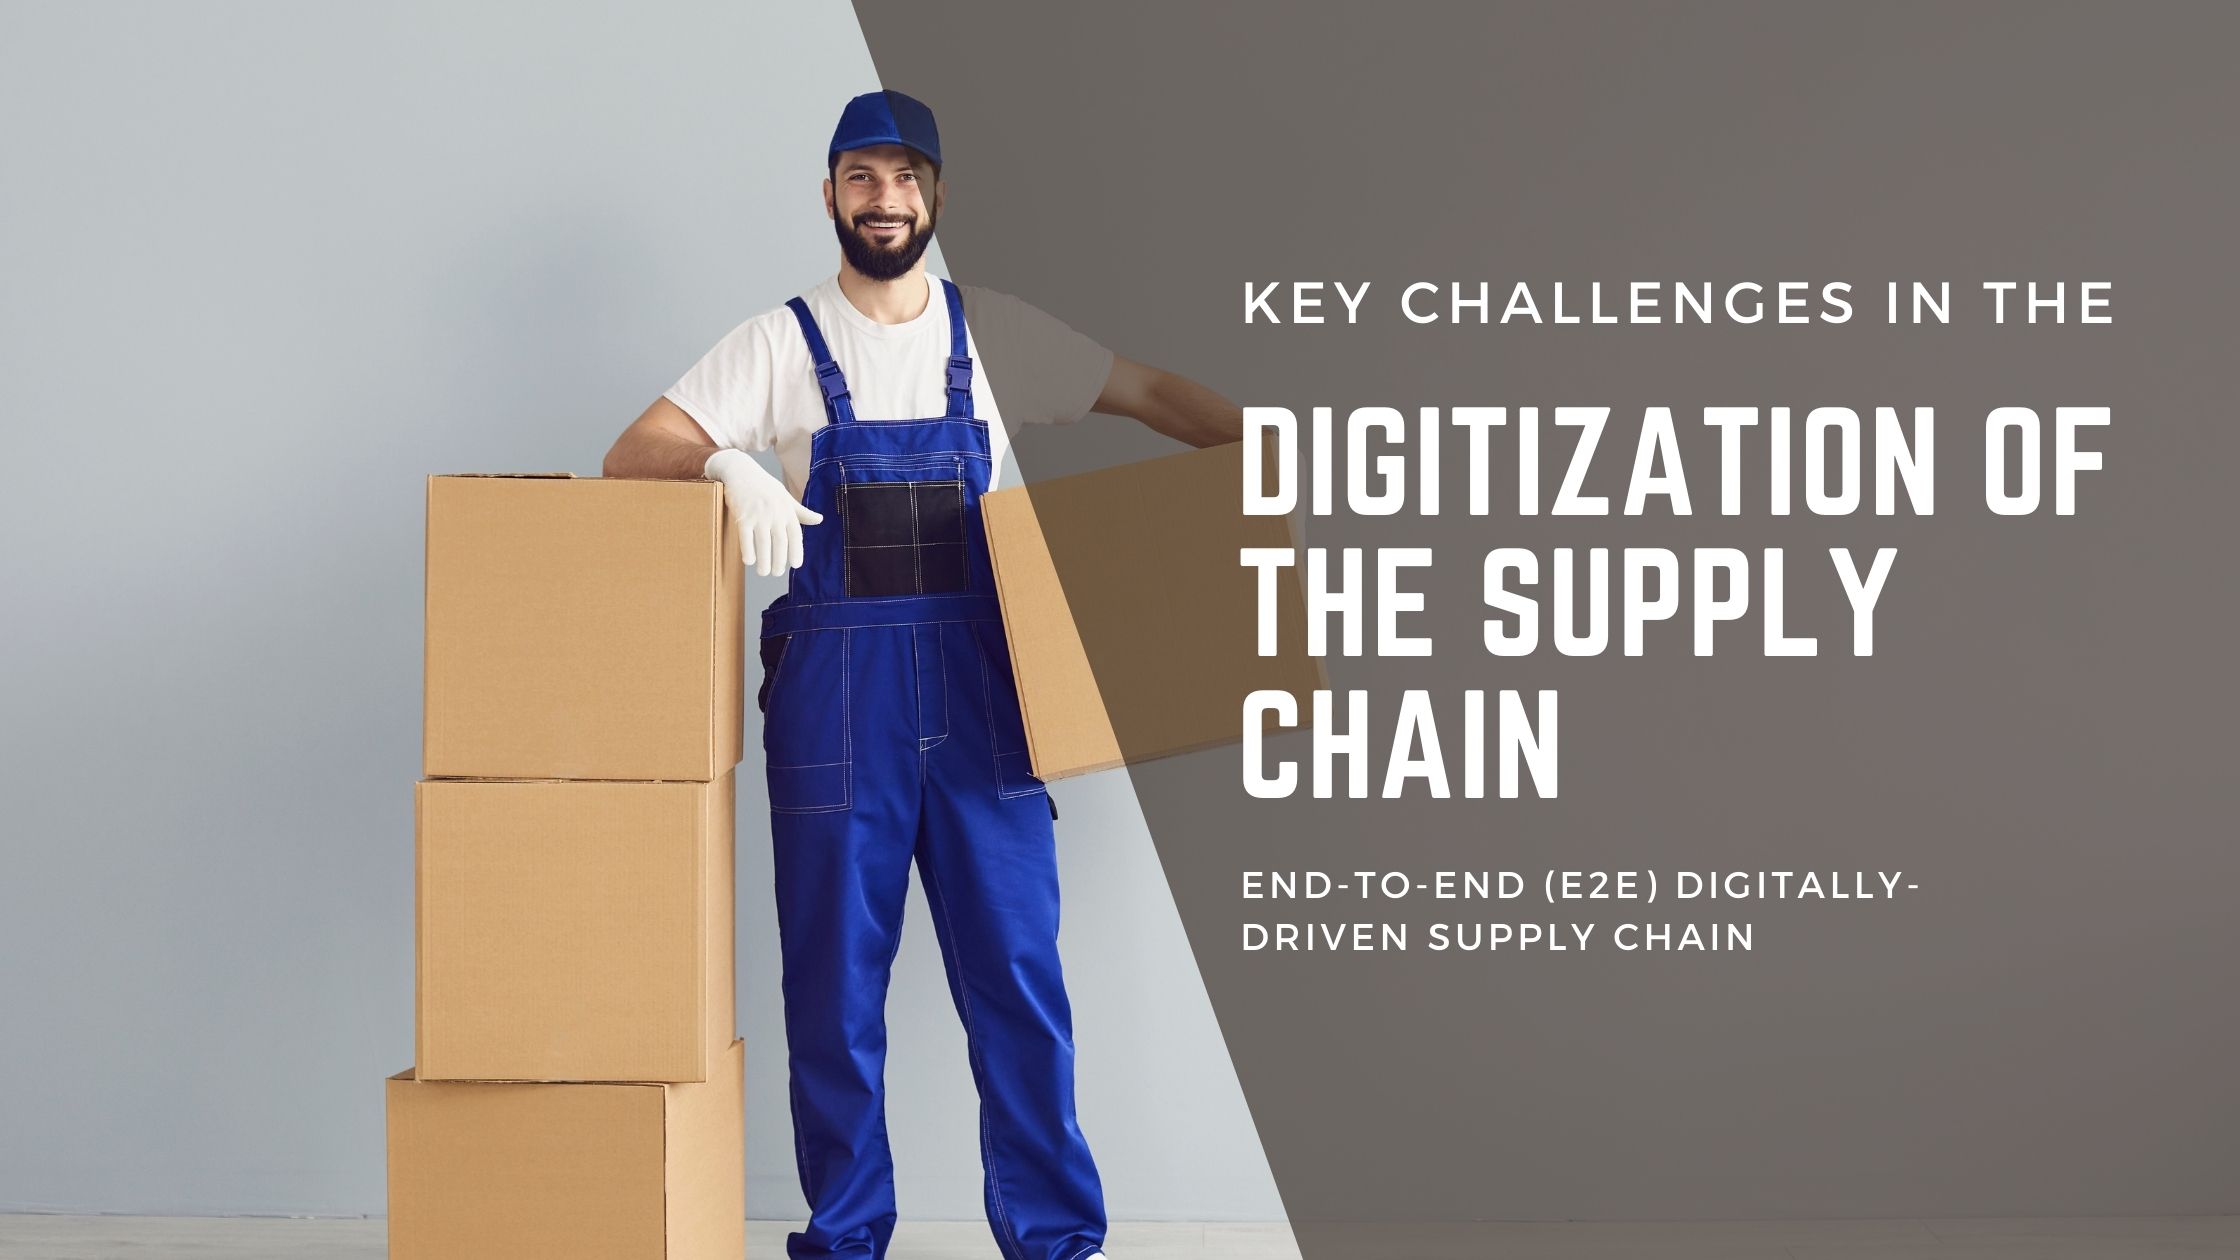 Digitization of the Supply Chain